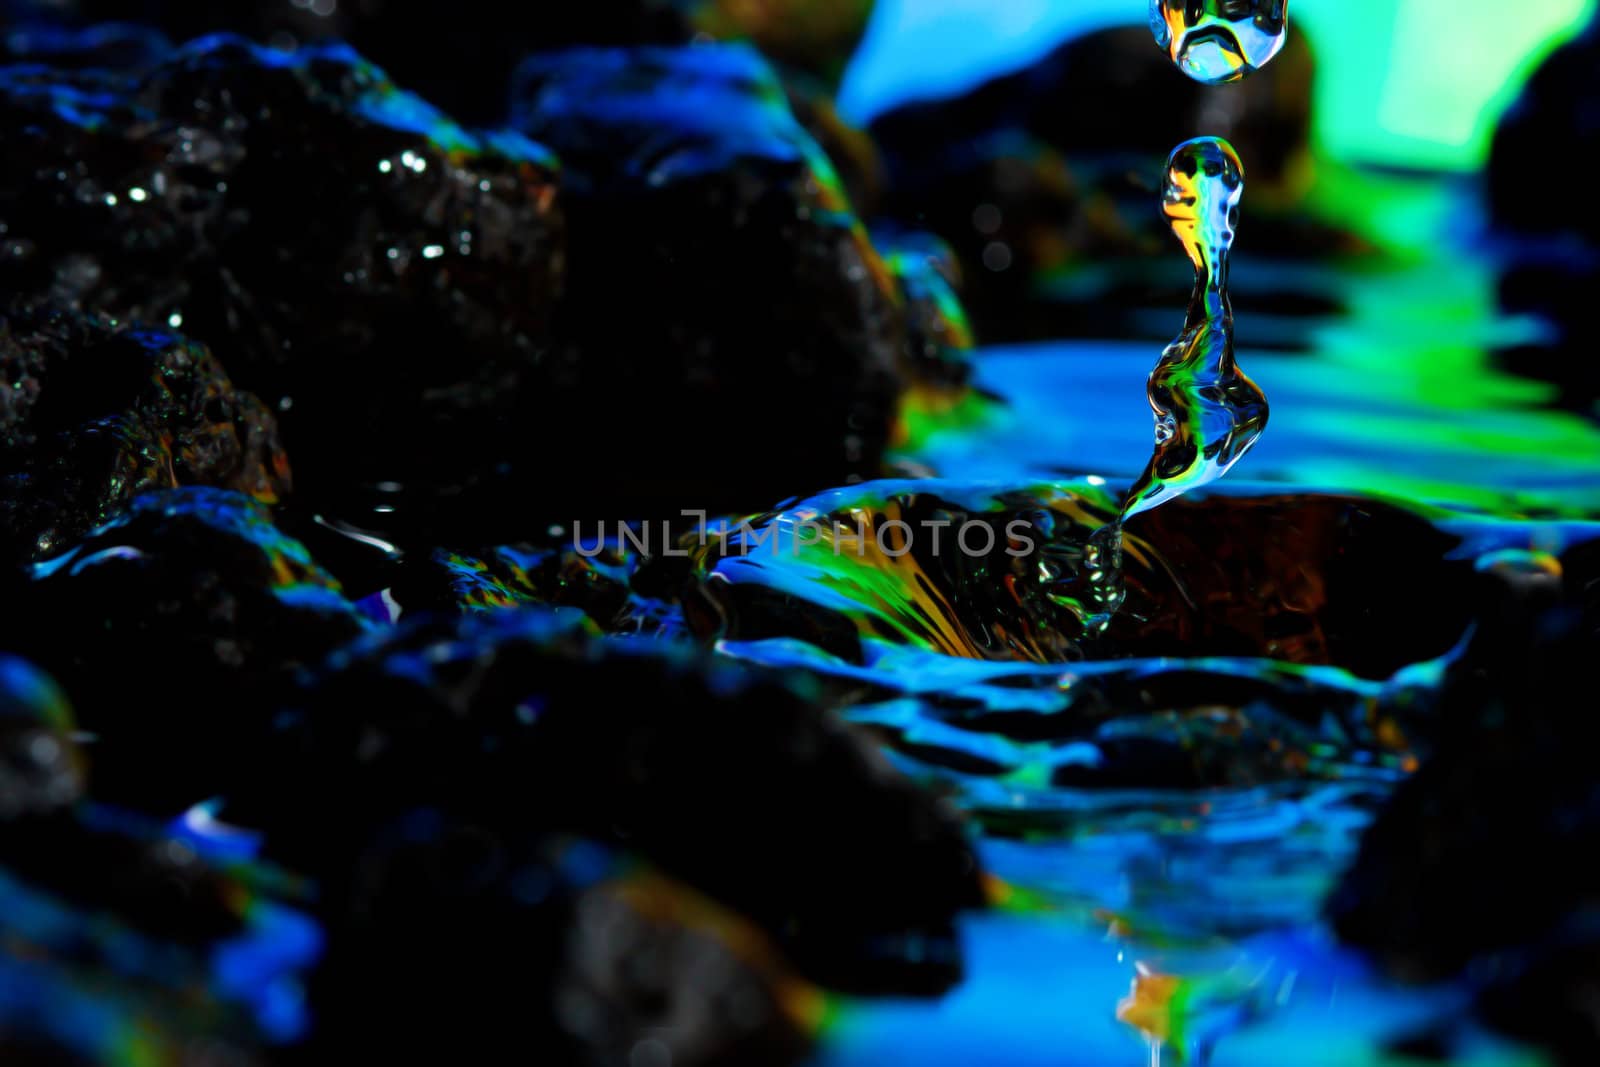 Colorful and Creative Water Drop Landscapes by Coffee999